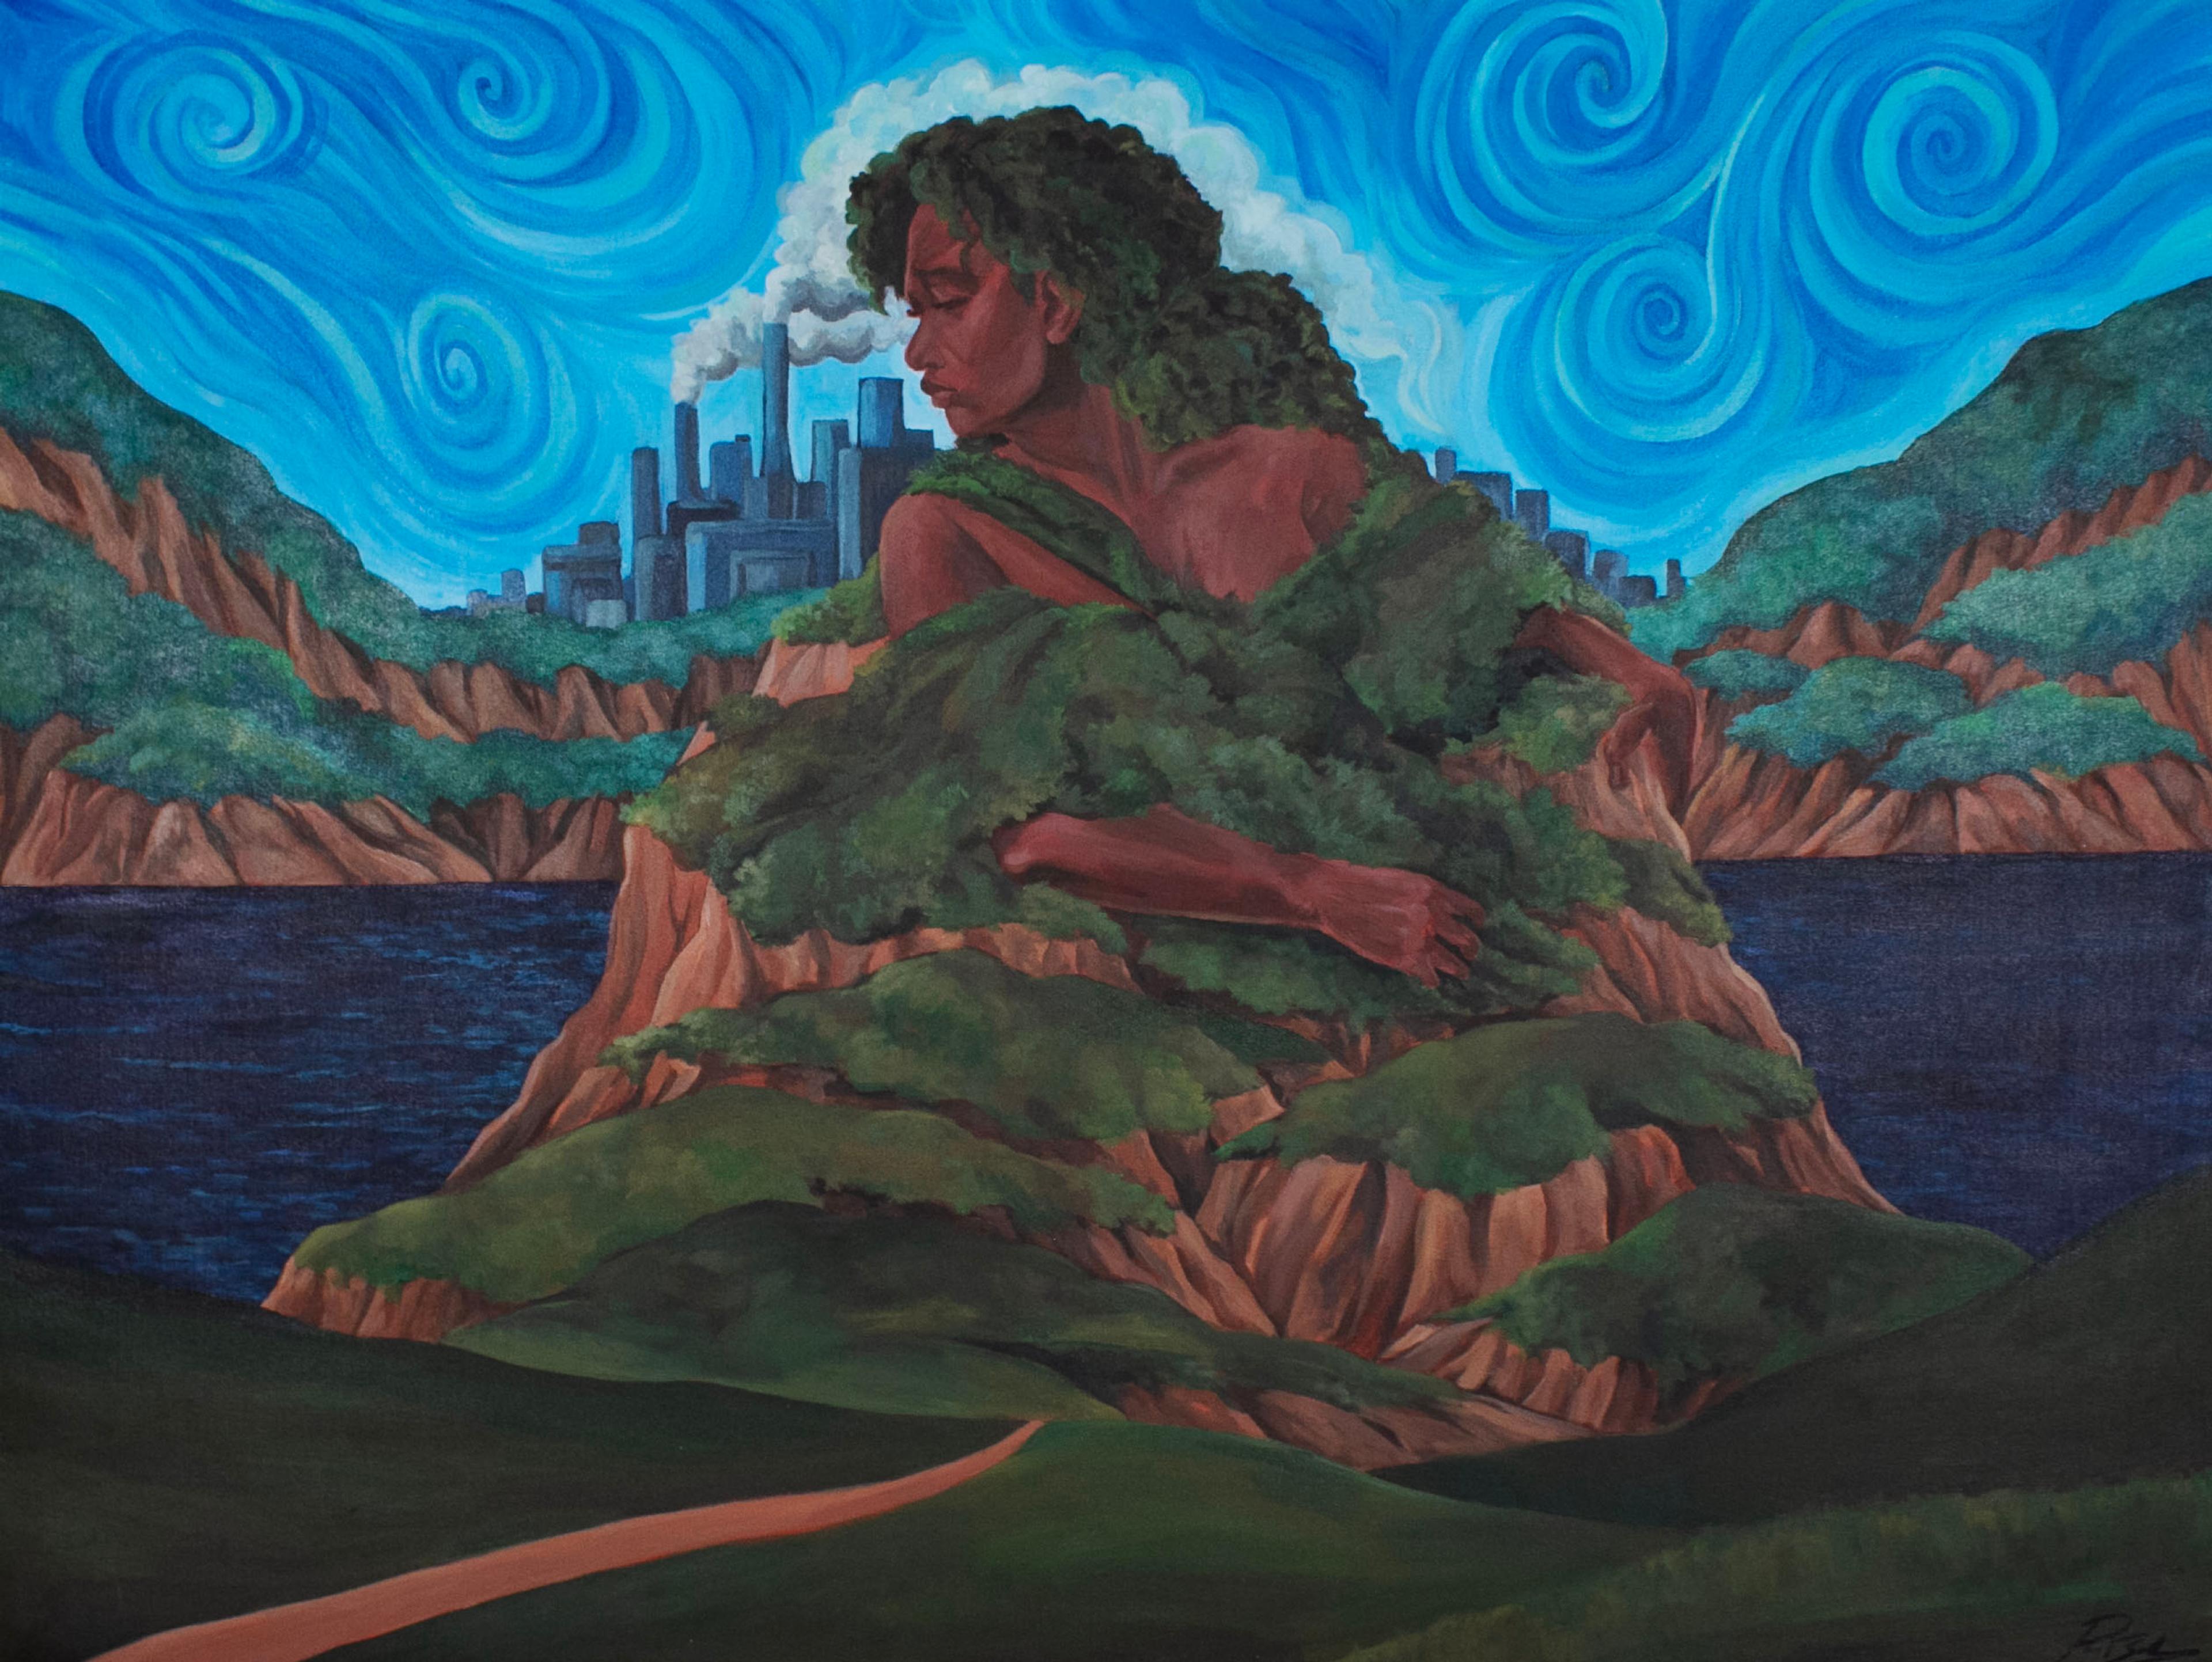 Acrylic-on-canvas painting of a Black woman facing left, depicted as a hybrid figure emerging atop a brown island covered in green foliage, sitting in a blue lake. The woman's long curly hair is green, and blends in with the green foliage of the island from which her head, shoulders, and wrists emerge. In the distant background, a mountainous landscape of brown hills and green foliage rise above the end of the blue lake. On the horizon, blue factory smokestacks spew gray smoke in the air directly behind the woman's head. The sky above is painted in blue circular swirls, reminiscent of the style of Vincent van Gogh.